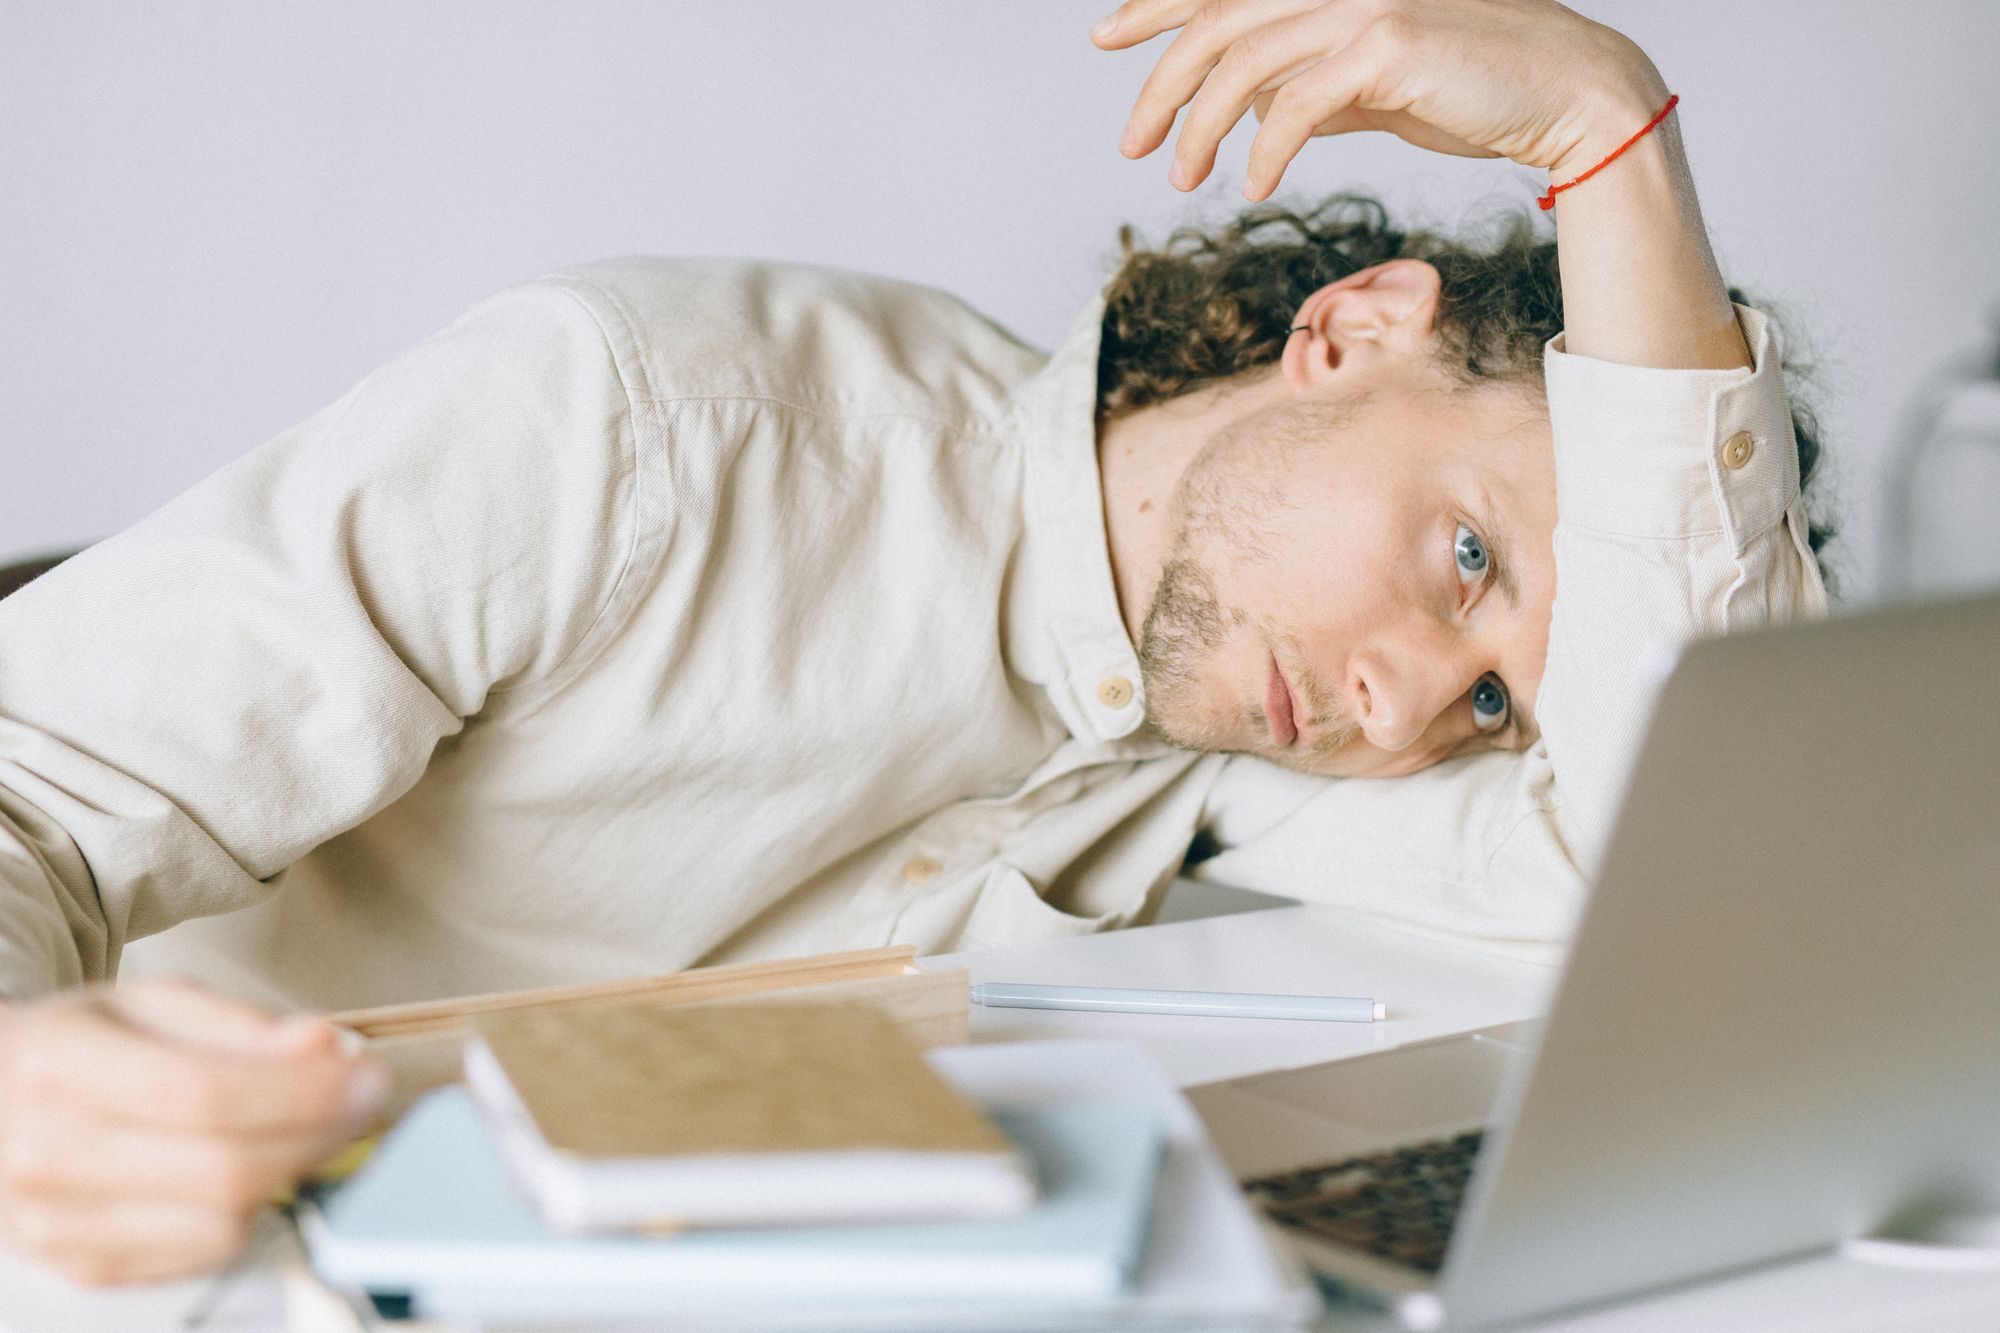 9 Ways To Recover From Burnout: Moving Forward When You're Exhausted